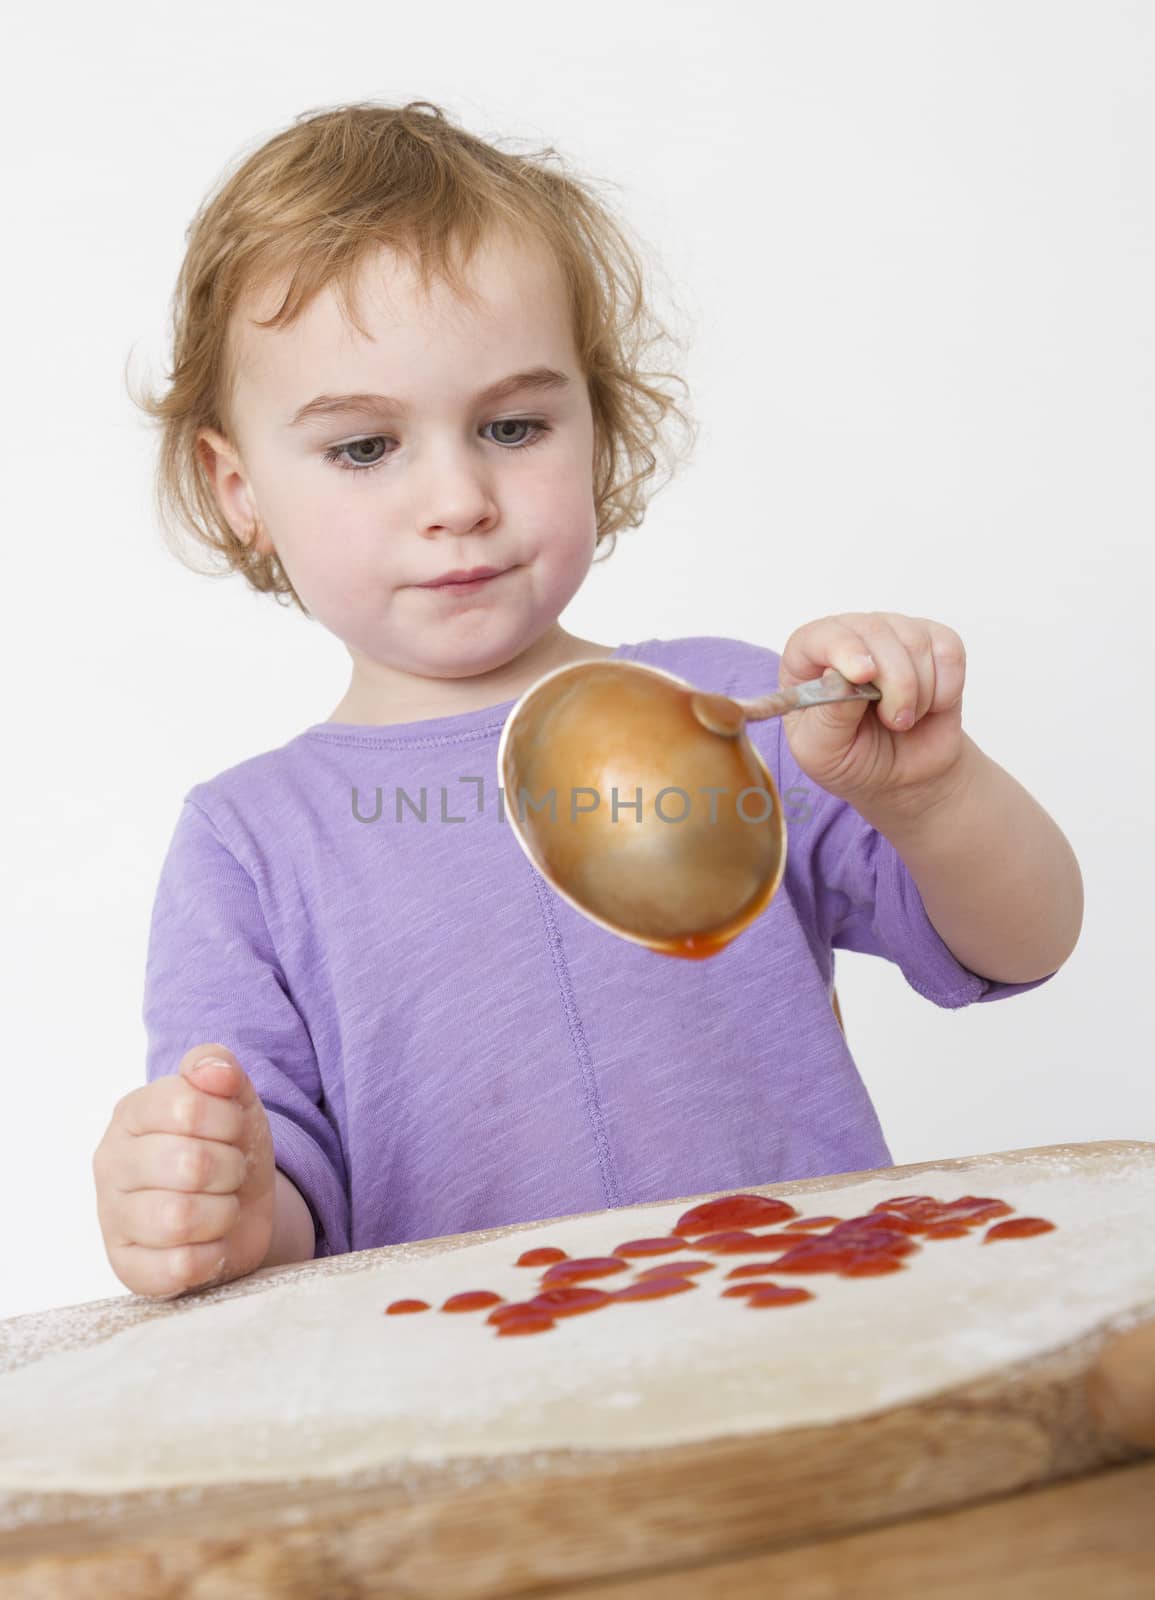 child putting sieved tomatoes on dough by gewoldi